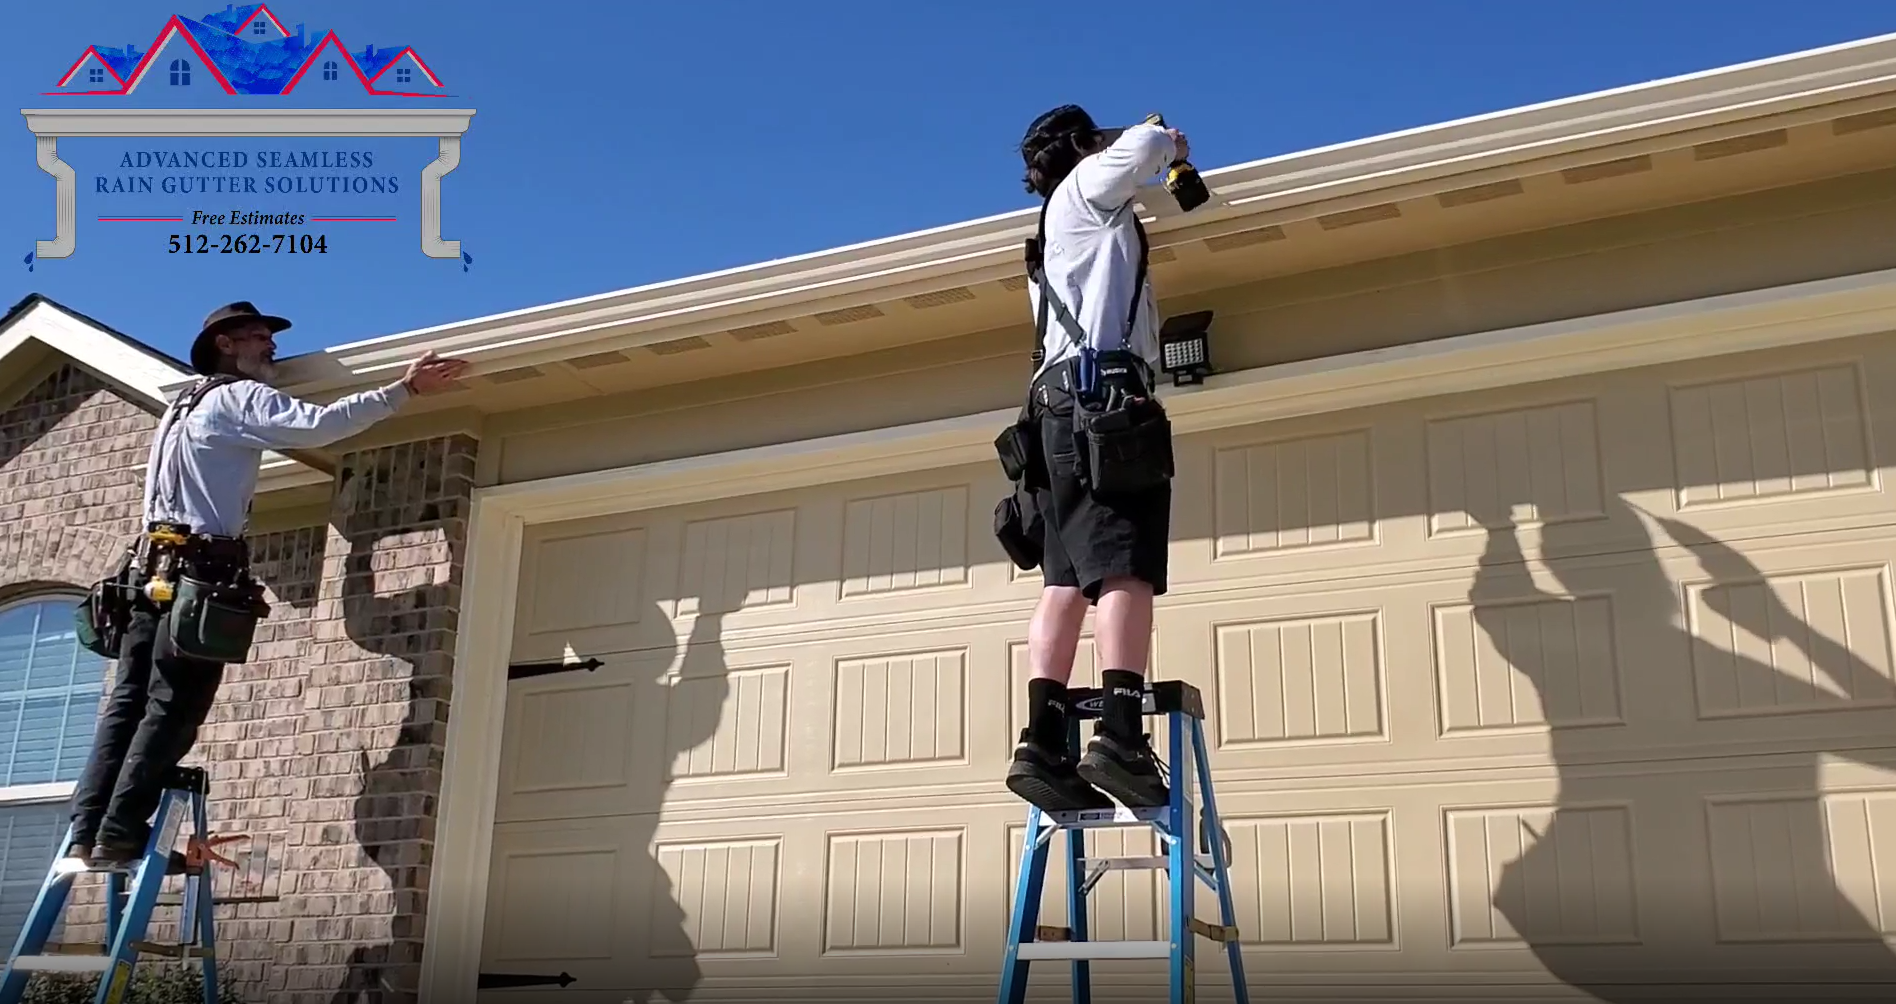 Rain Gutter Installation Tips from the Experts